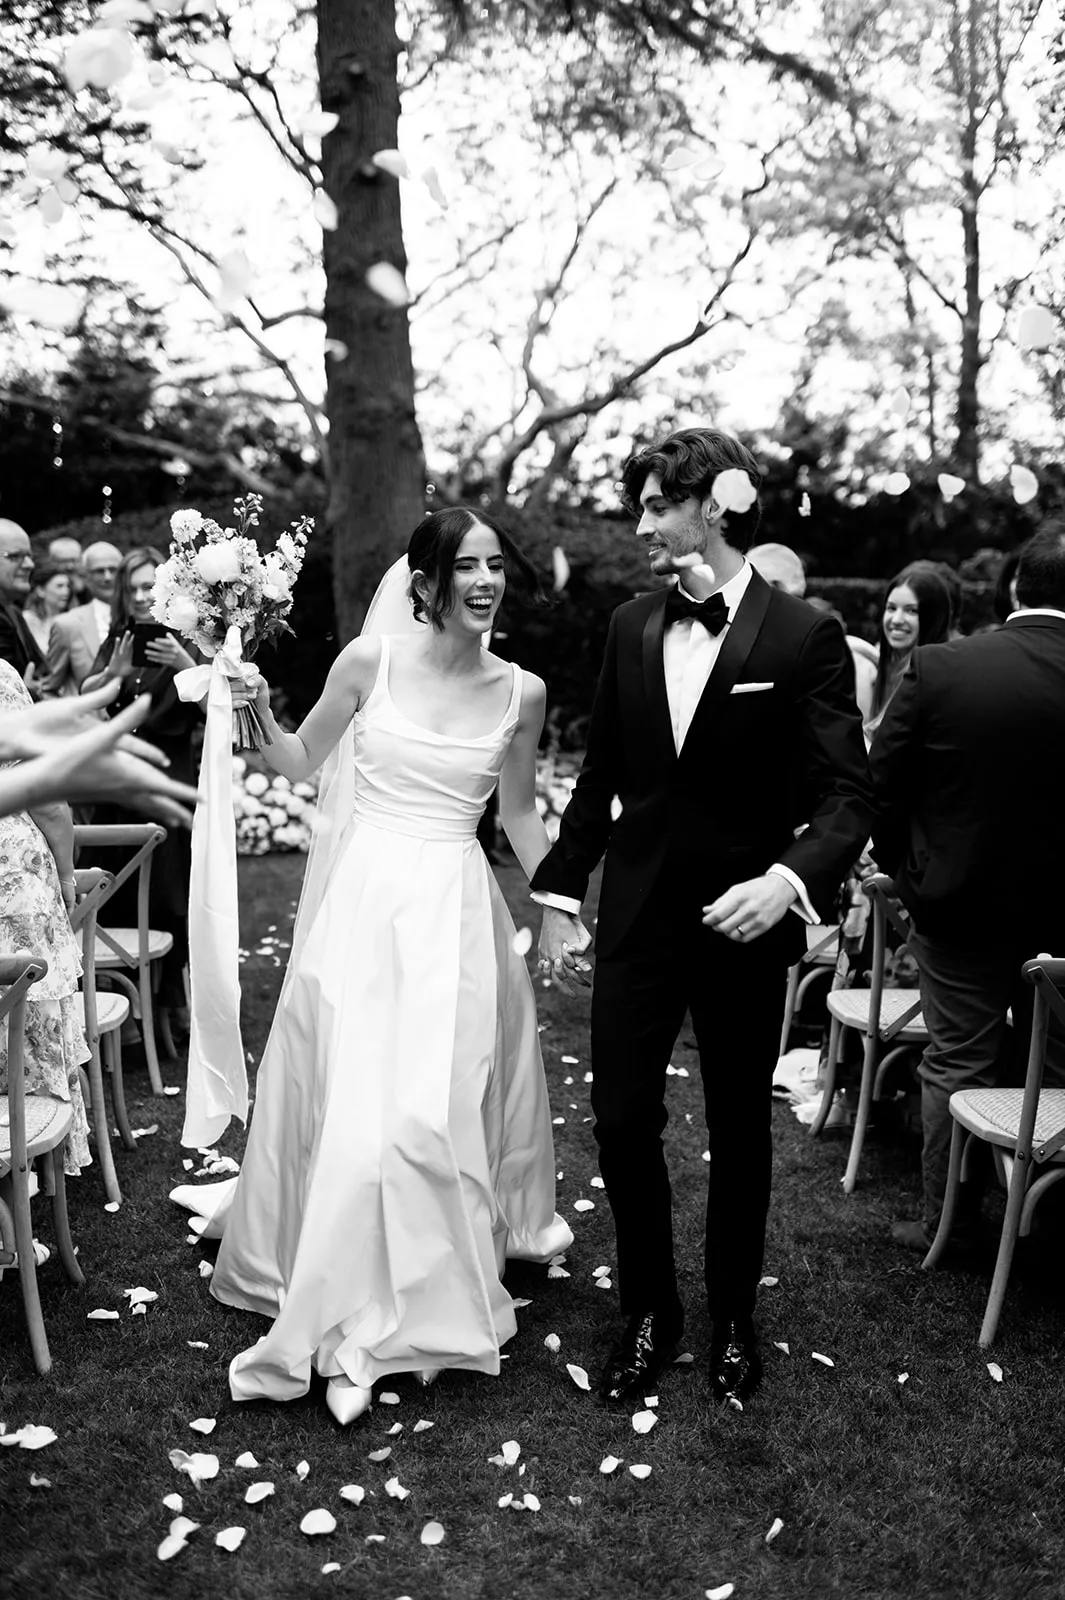 A bride and groom walk hand-in-hand down an outdoor aisle while guests cheer and throw flower petals. The bride is wearing a white wedding dress and holding a bouquet, and the groom is in a dark suit. The scene is set in a garden with trees in the background.